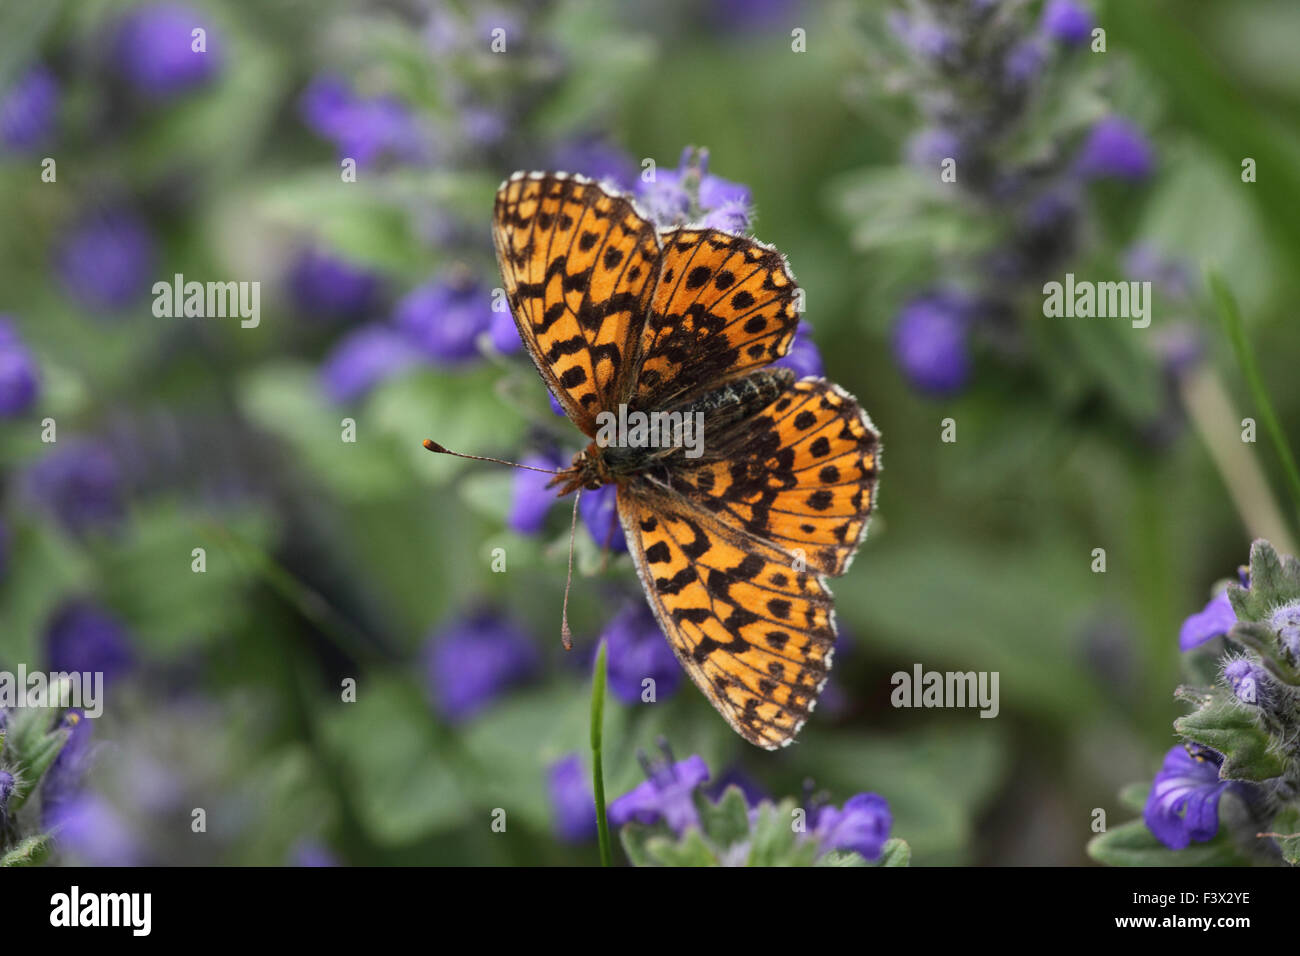 taking nectar from flower Hungary May 2015 Stock Photo